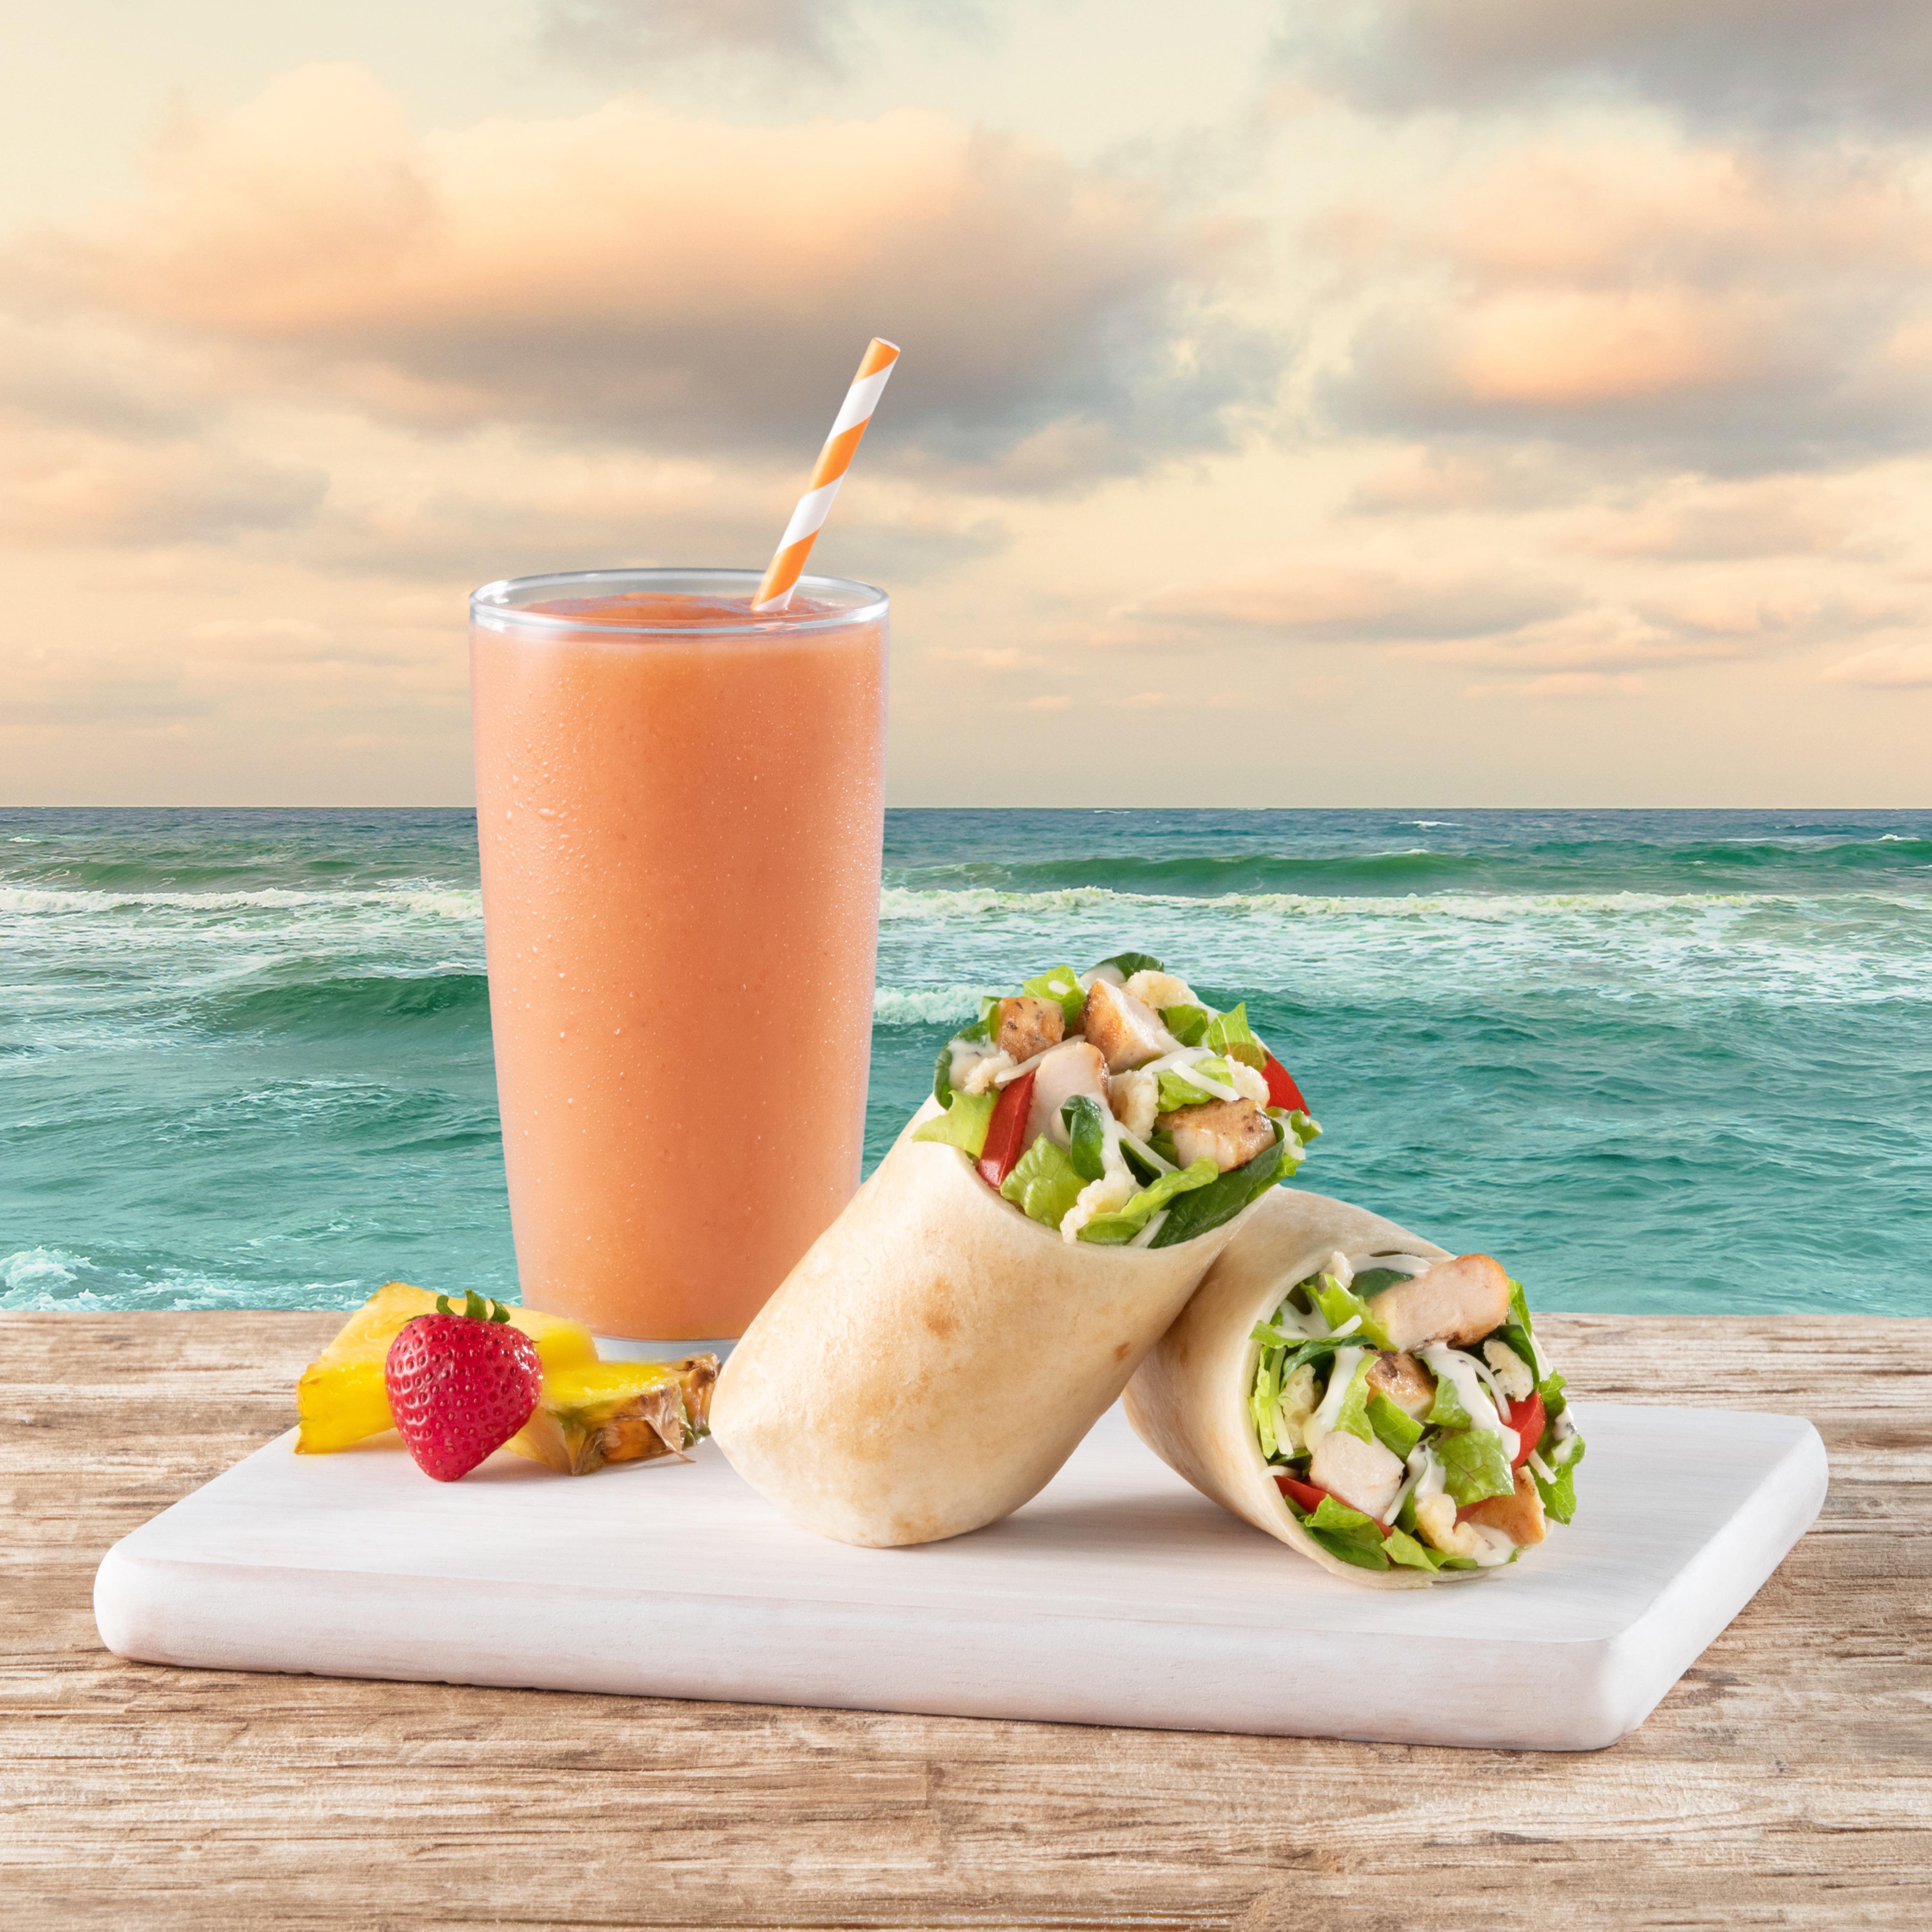 Tropical Smoothie Cafe Hershey (717)298-1566